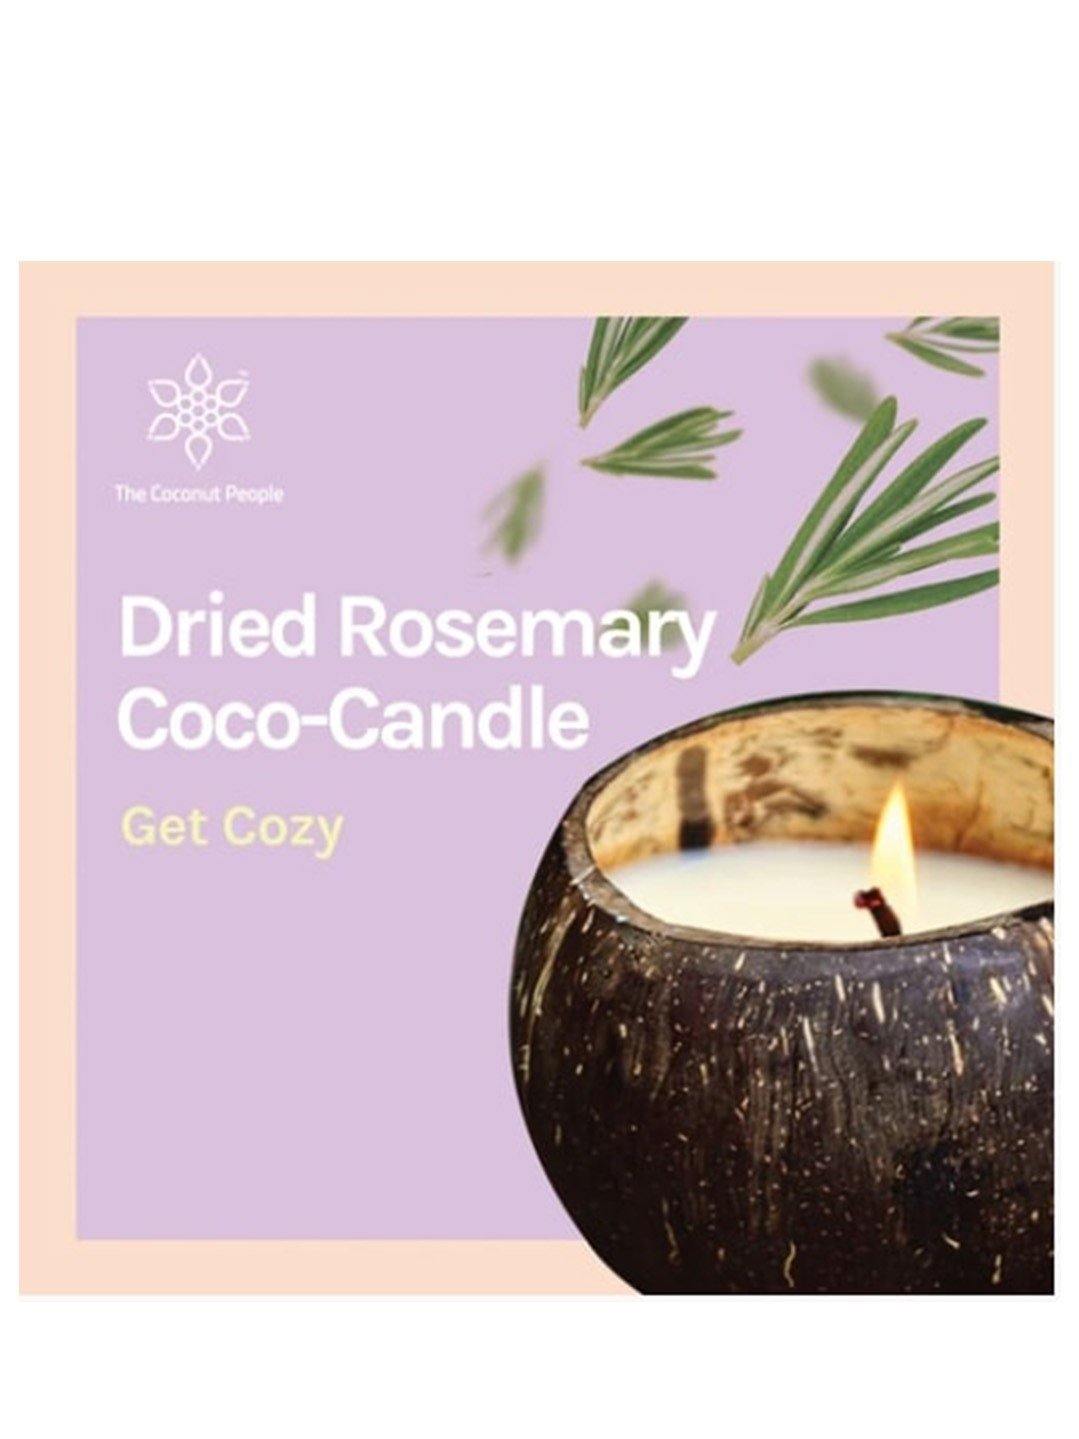 Dried Rosemary Coco-Candle - The Coconut People - View 6